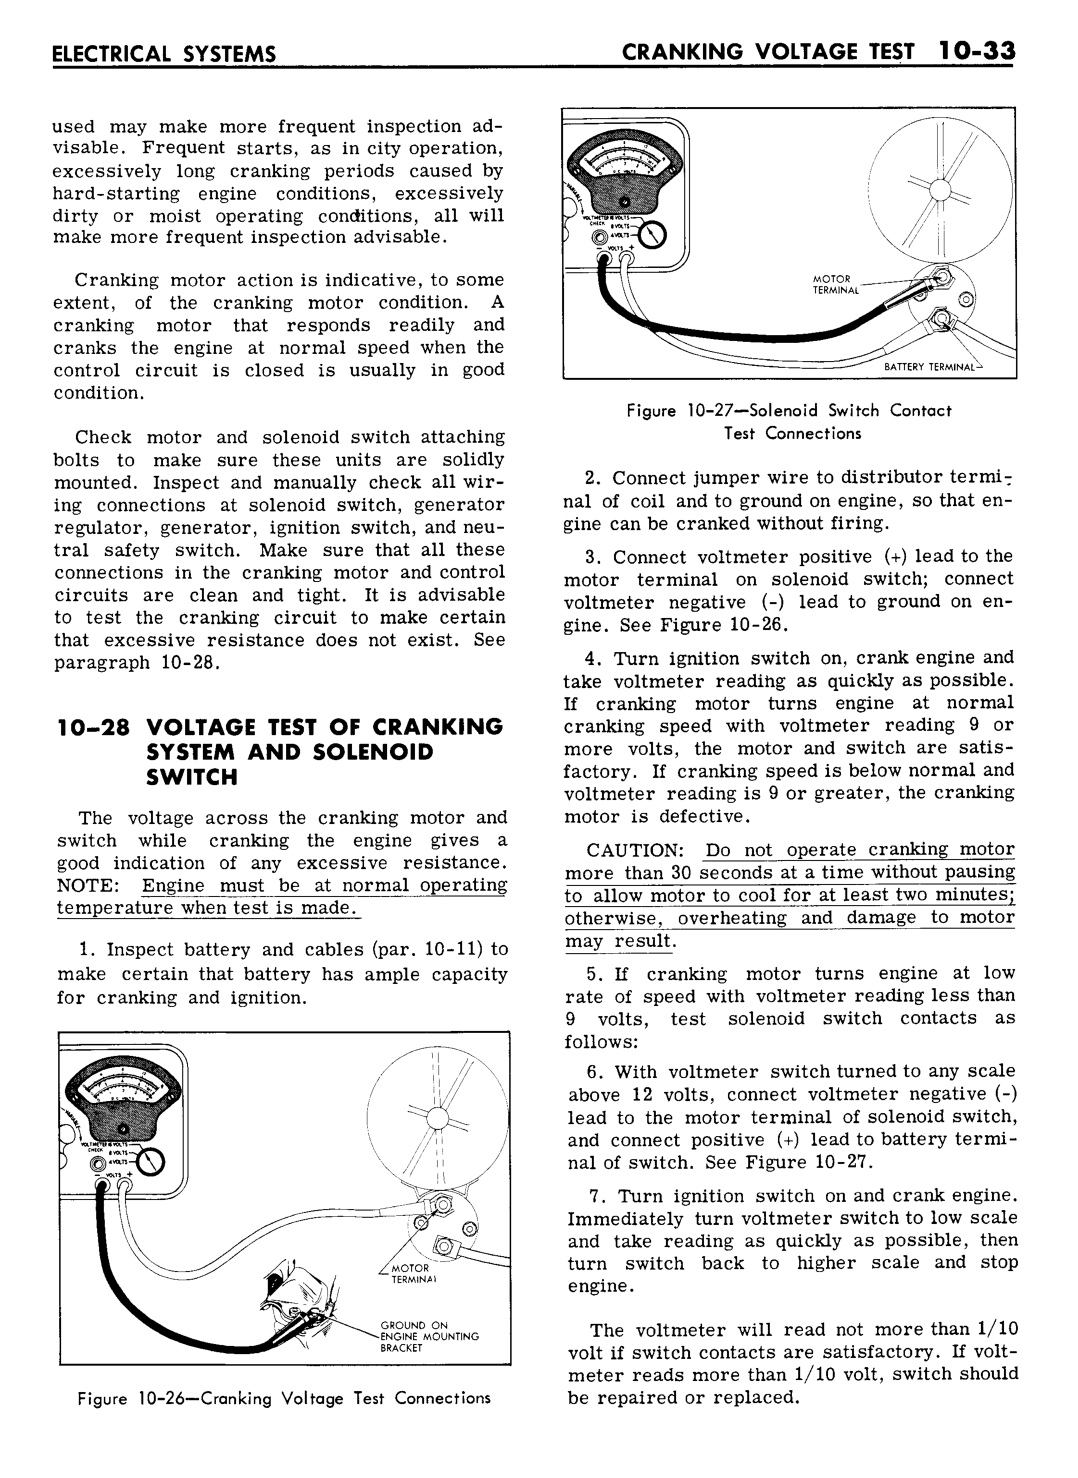 n_10 1961 Buick Shop Manual - Electrical Systems-033-033.jpg